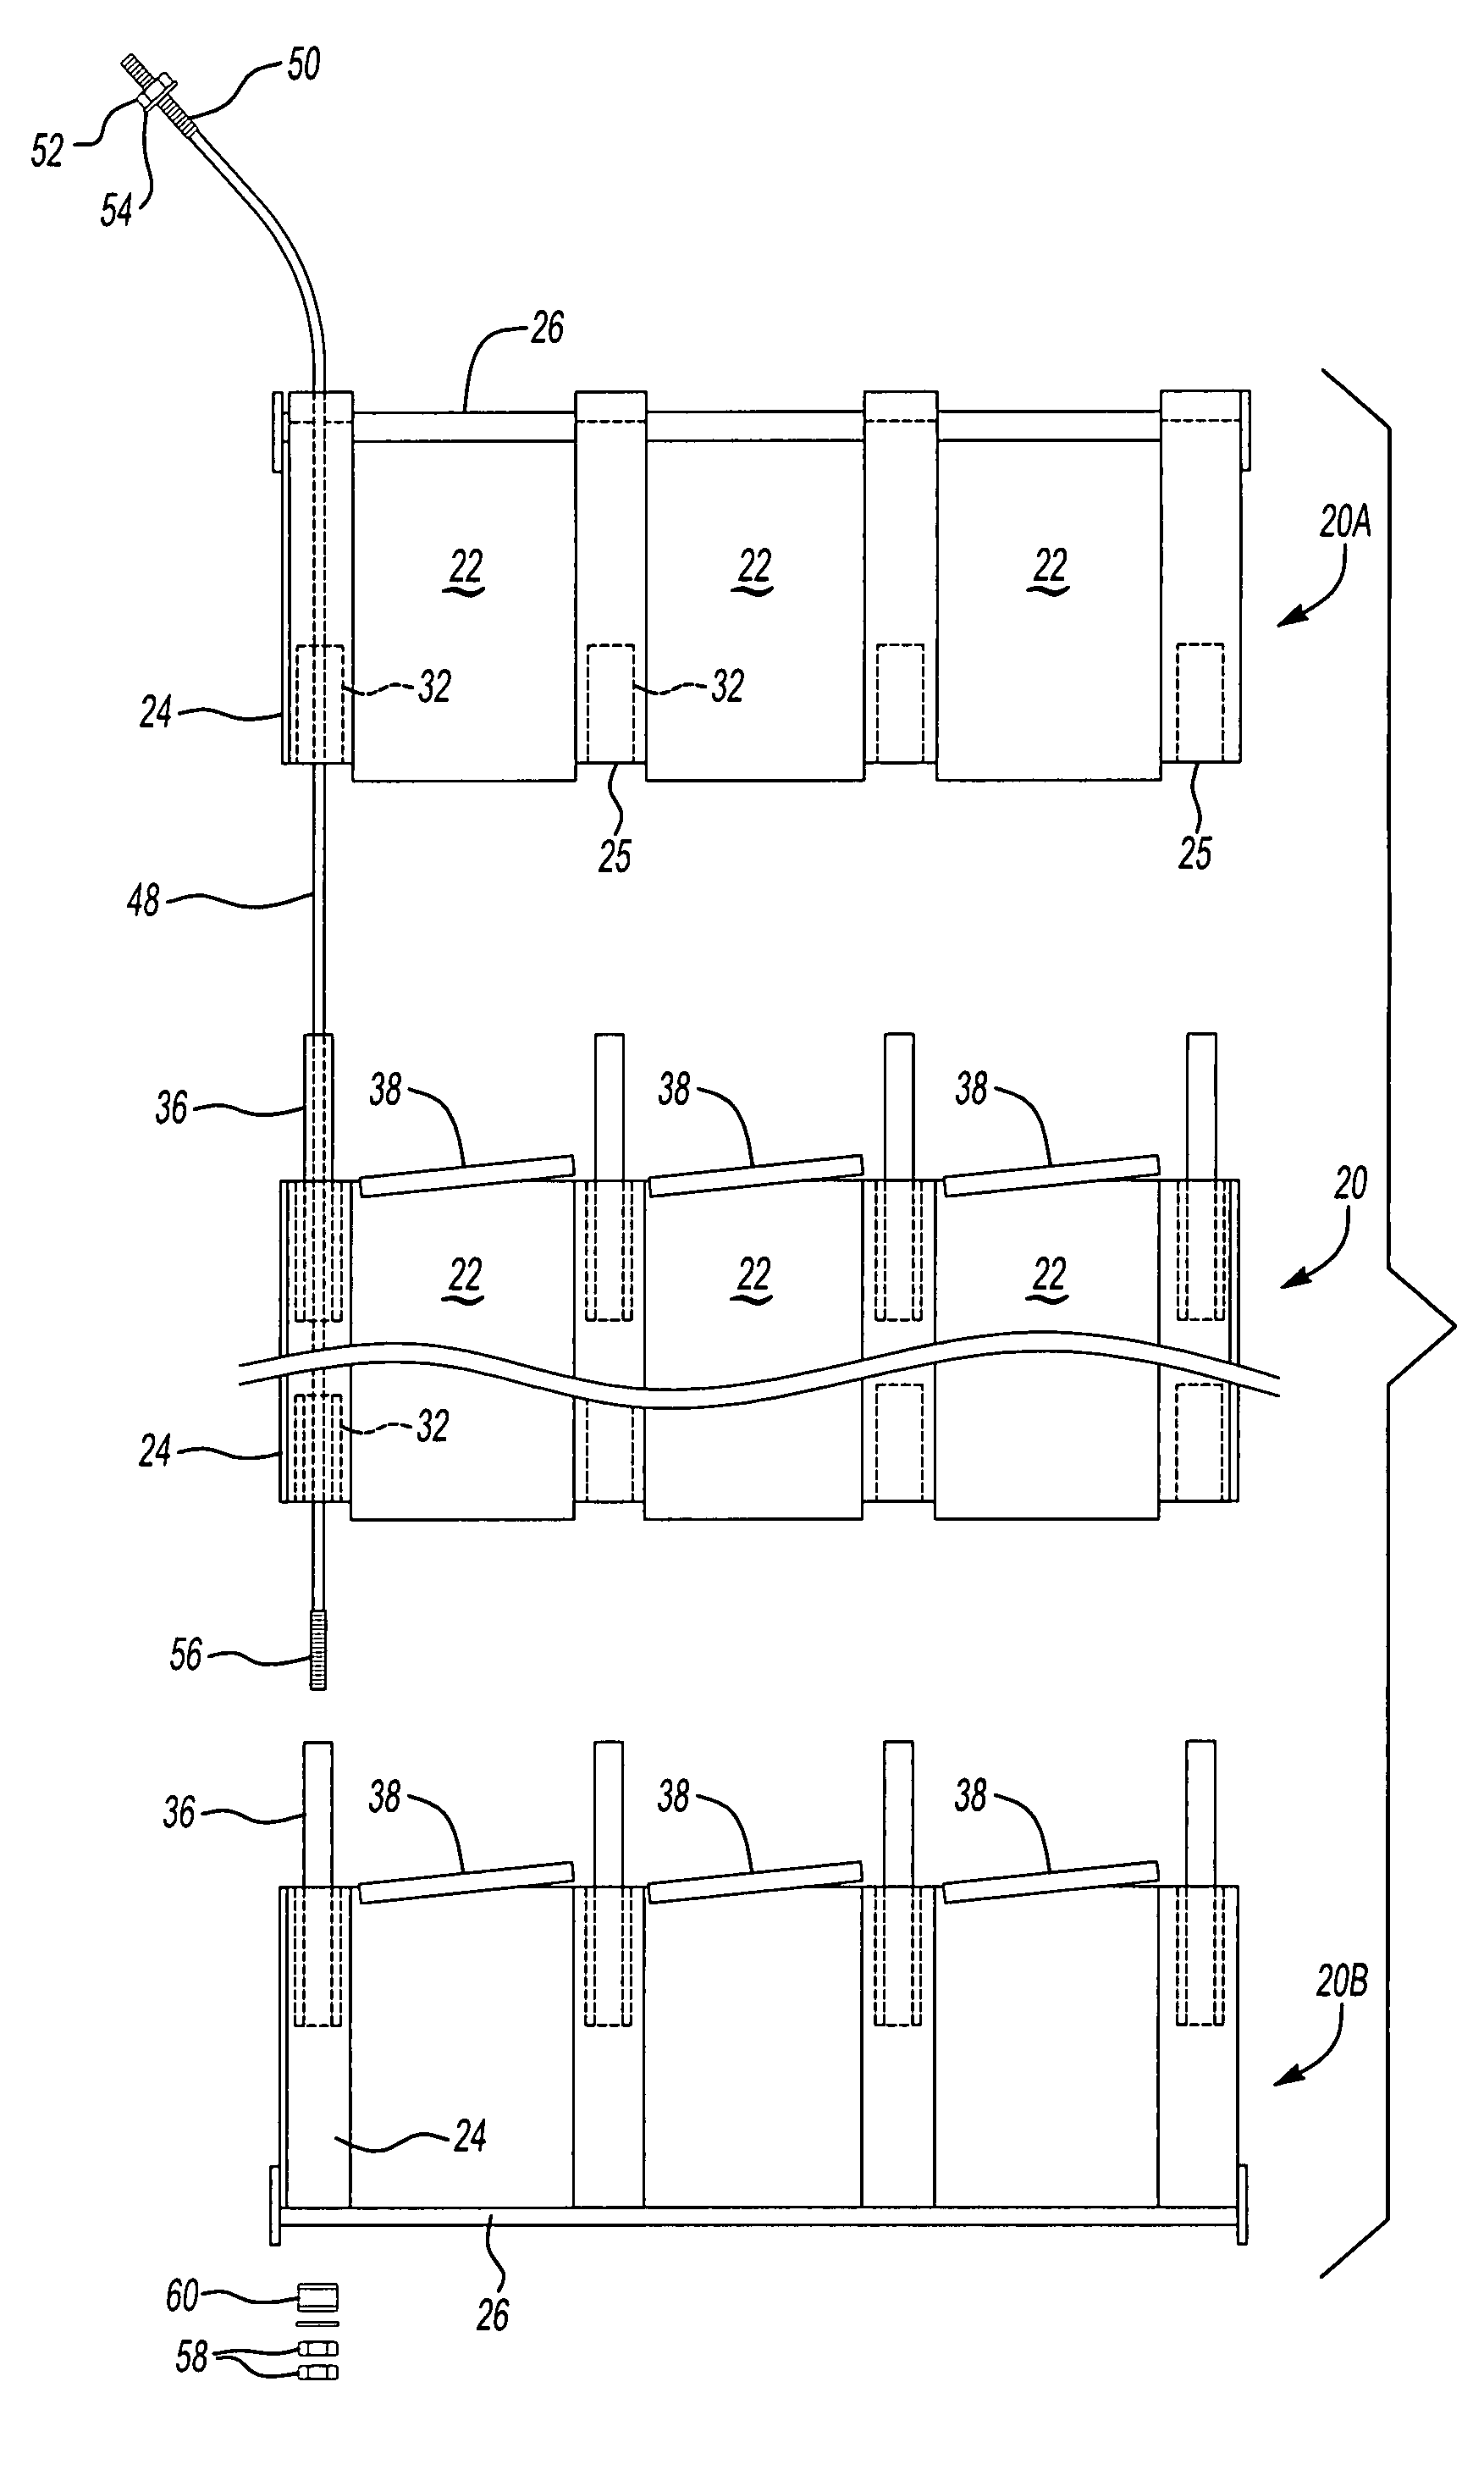 Method of making replacement collecting electrodes for an electrostatic precipitator